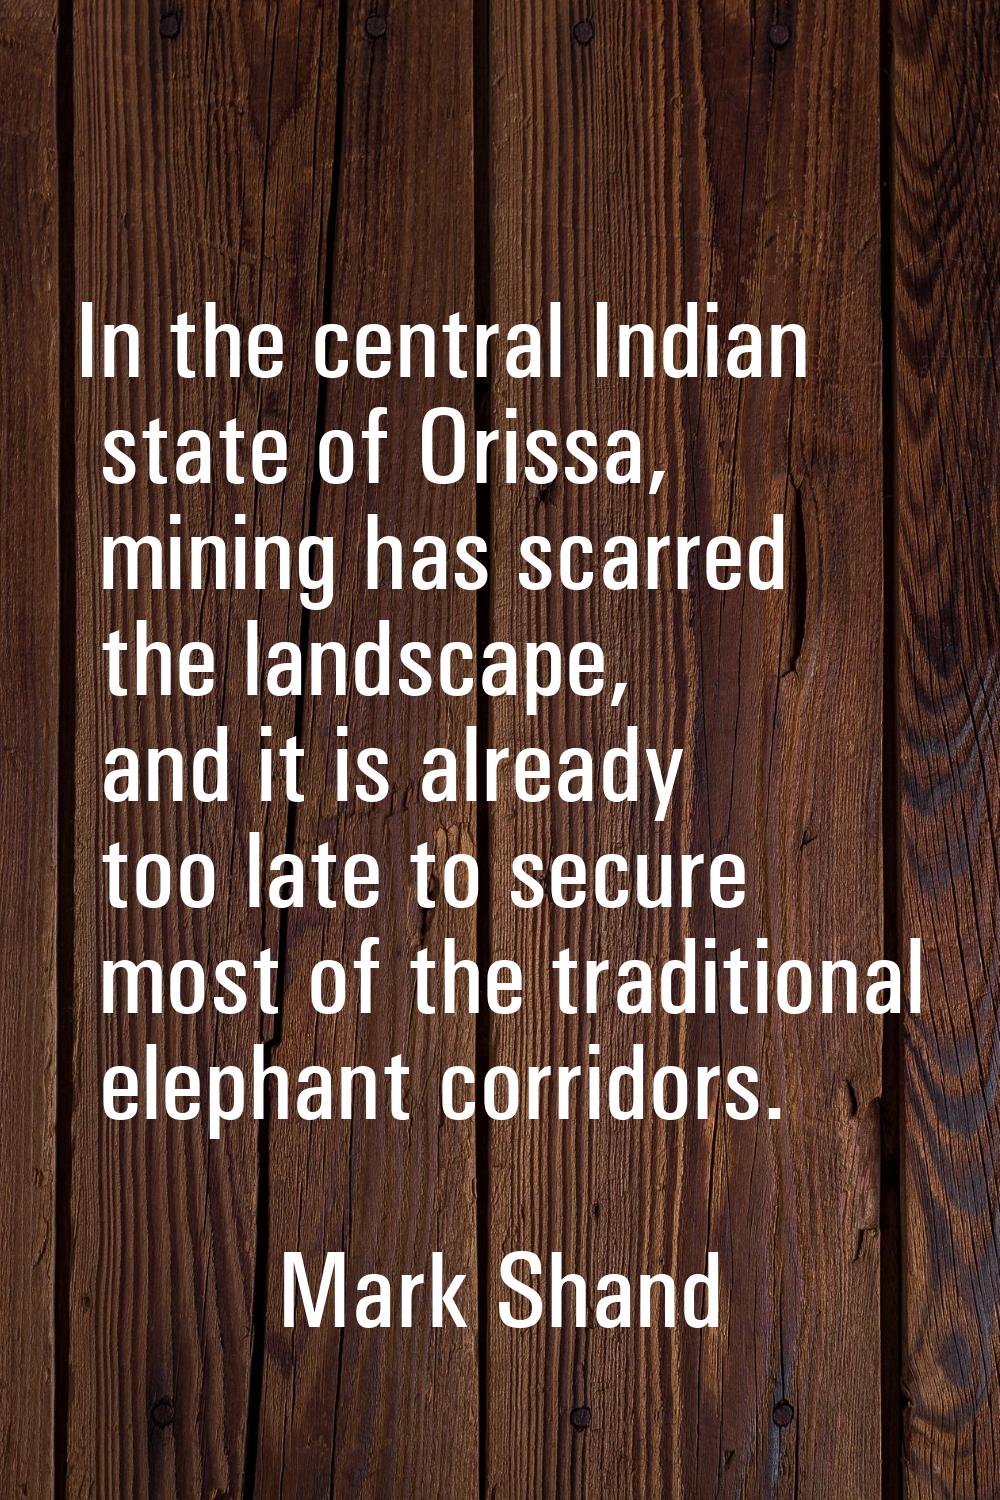 In the central Indian state of Orissa, mining has scarred the landscape, and it is already too late